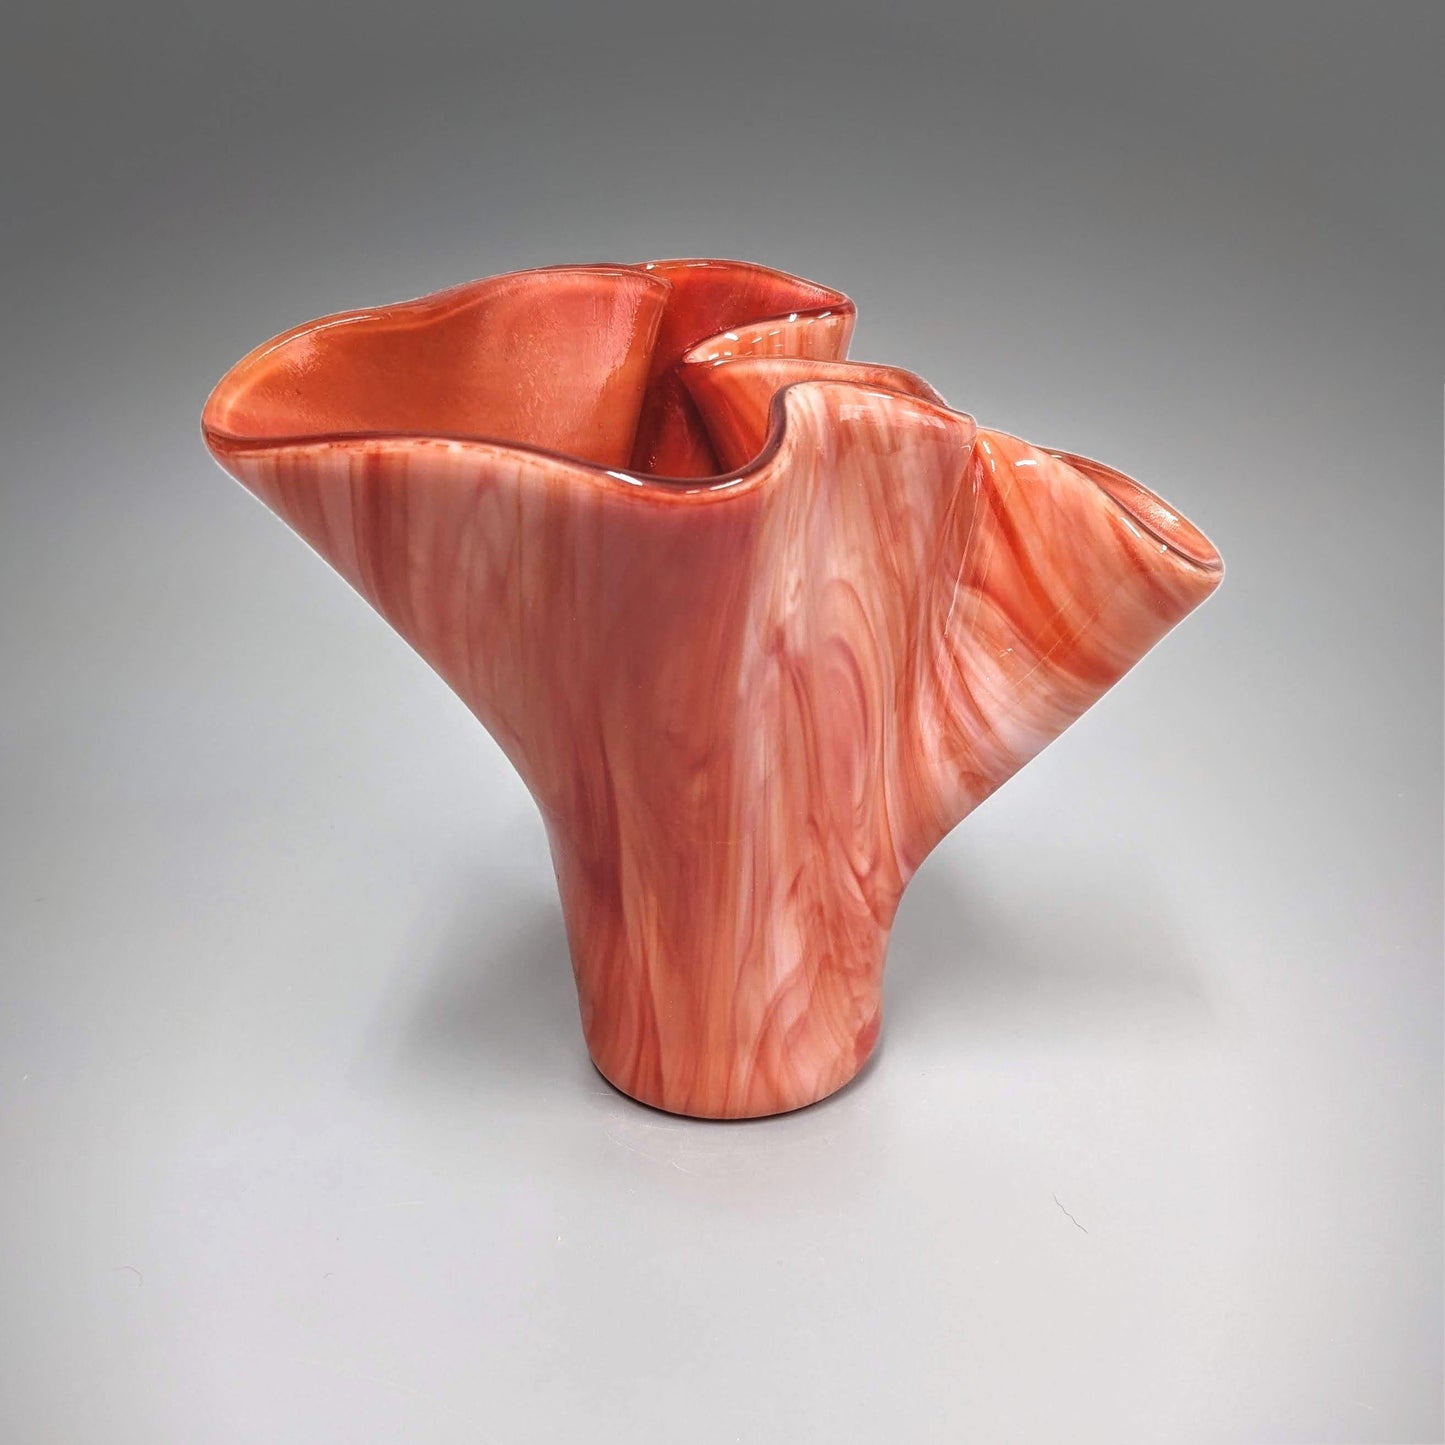 Art Glass Free Form Vase in Red and Orange | Modern Gifts & Home Décor